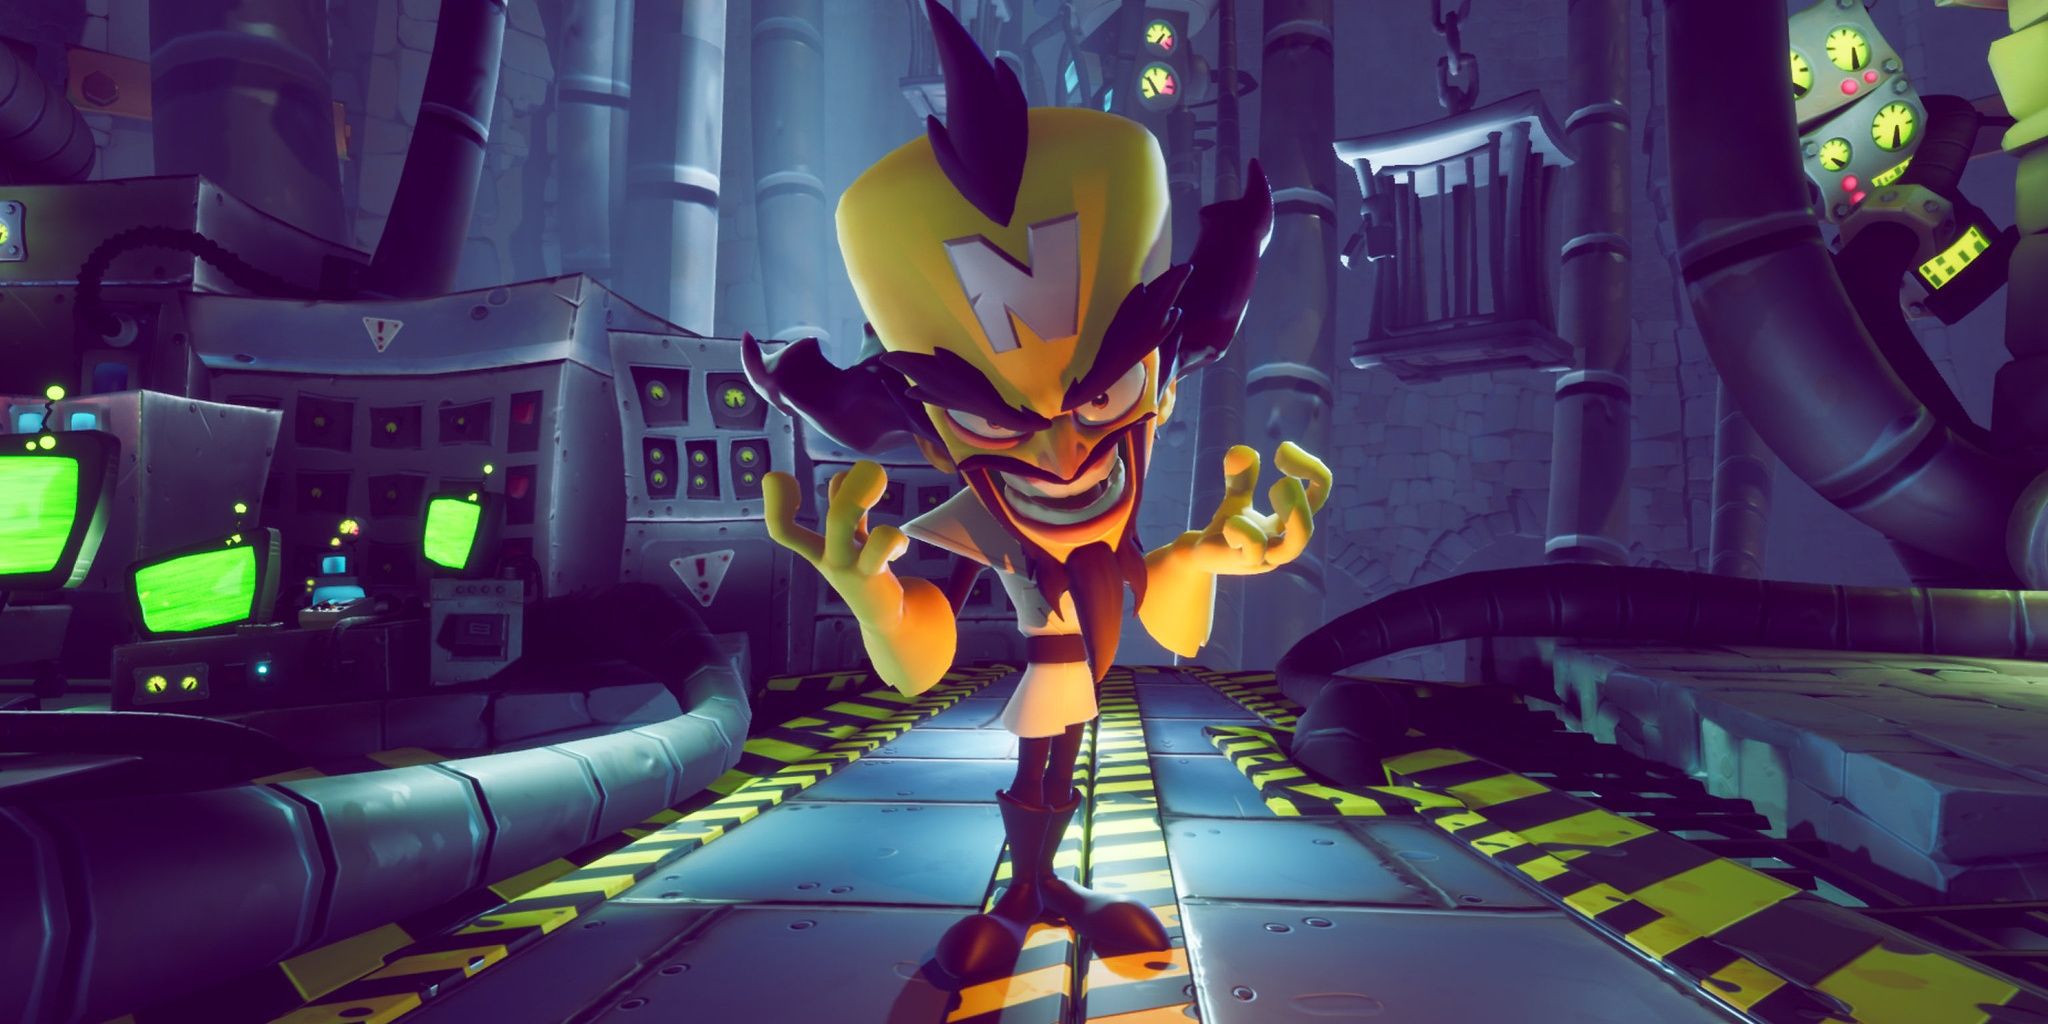 Dr. Neo Cortex in his lab, from Crash Bandicoot 4: It's About Time